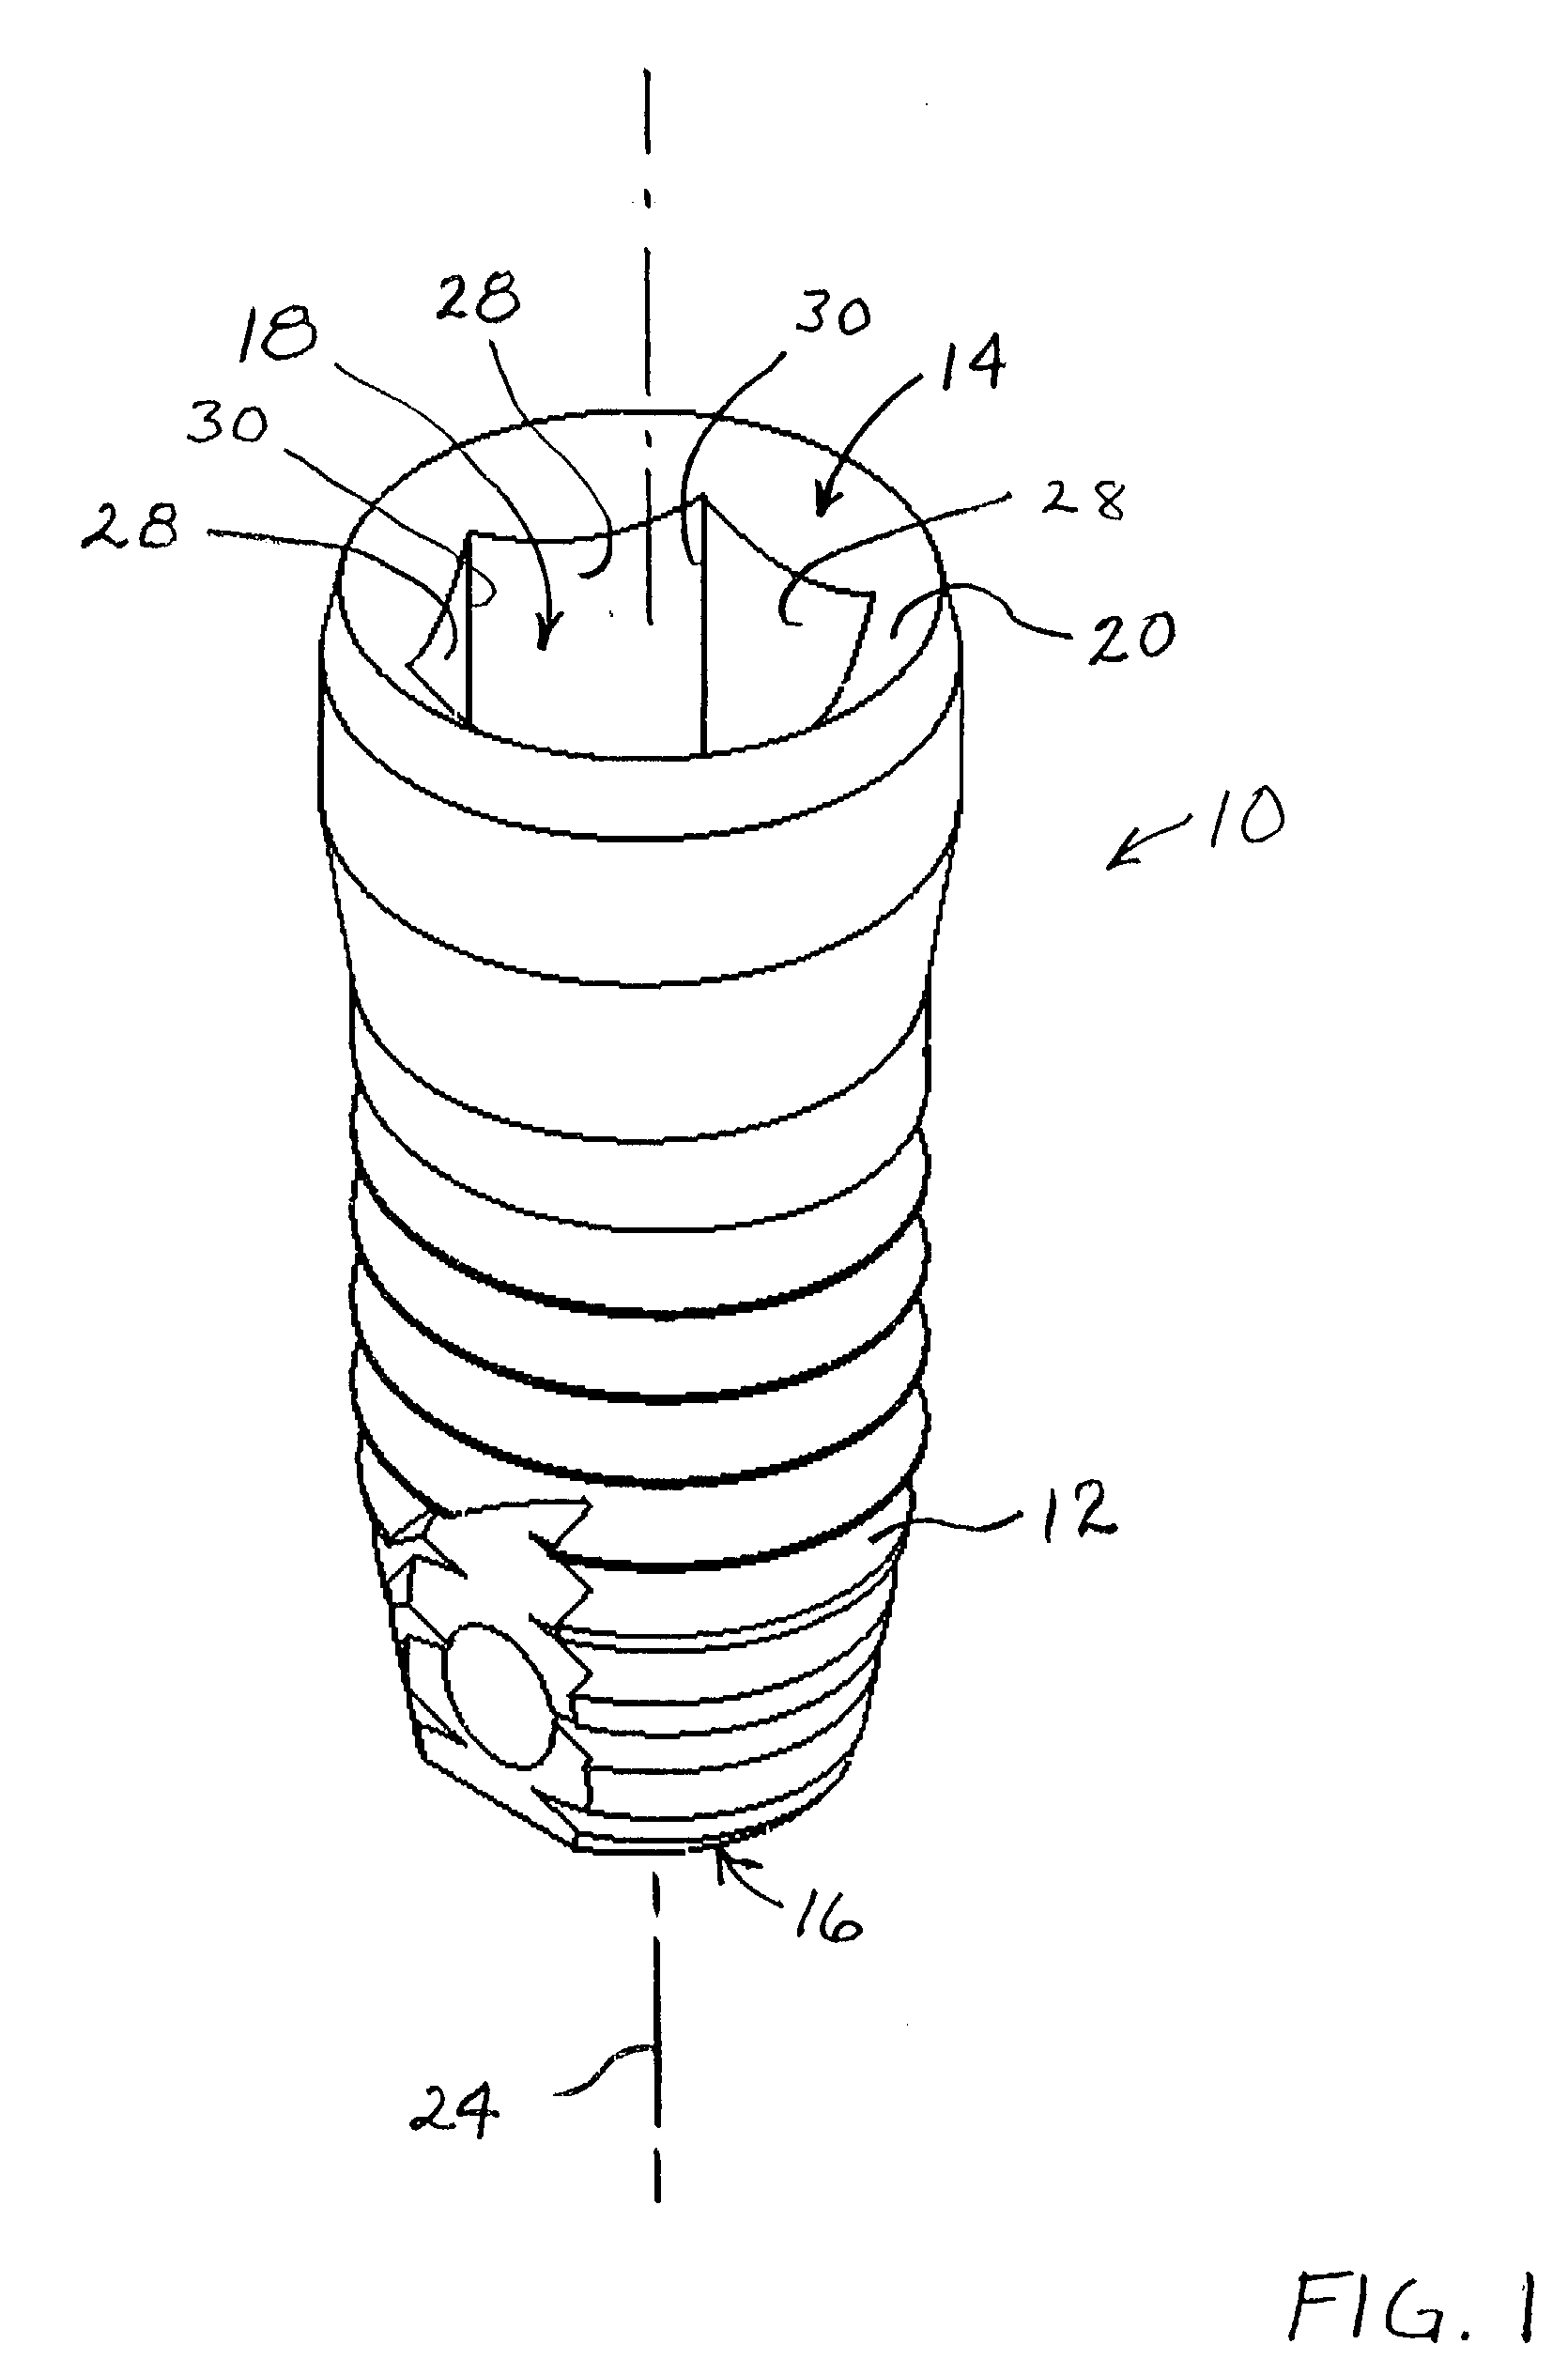 Rotationally immobilized dental implant and abutment system